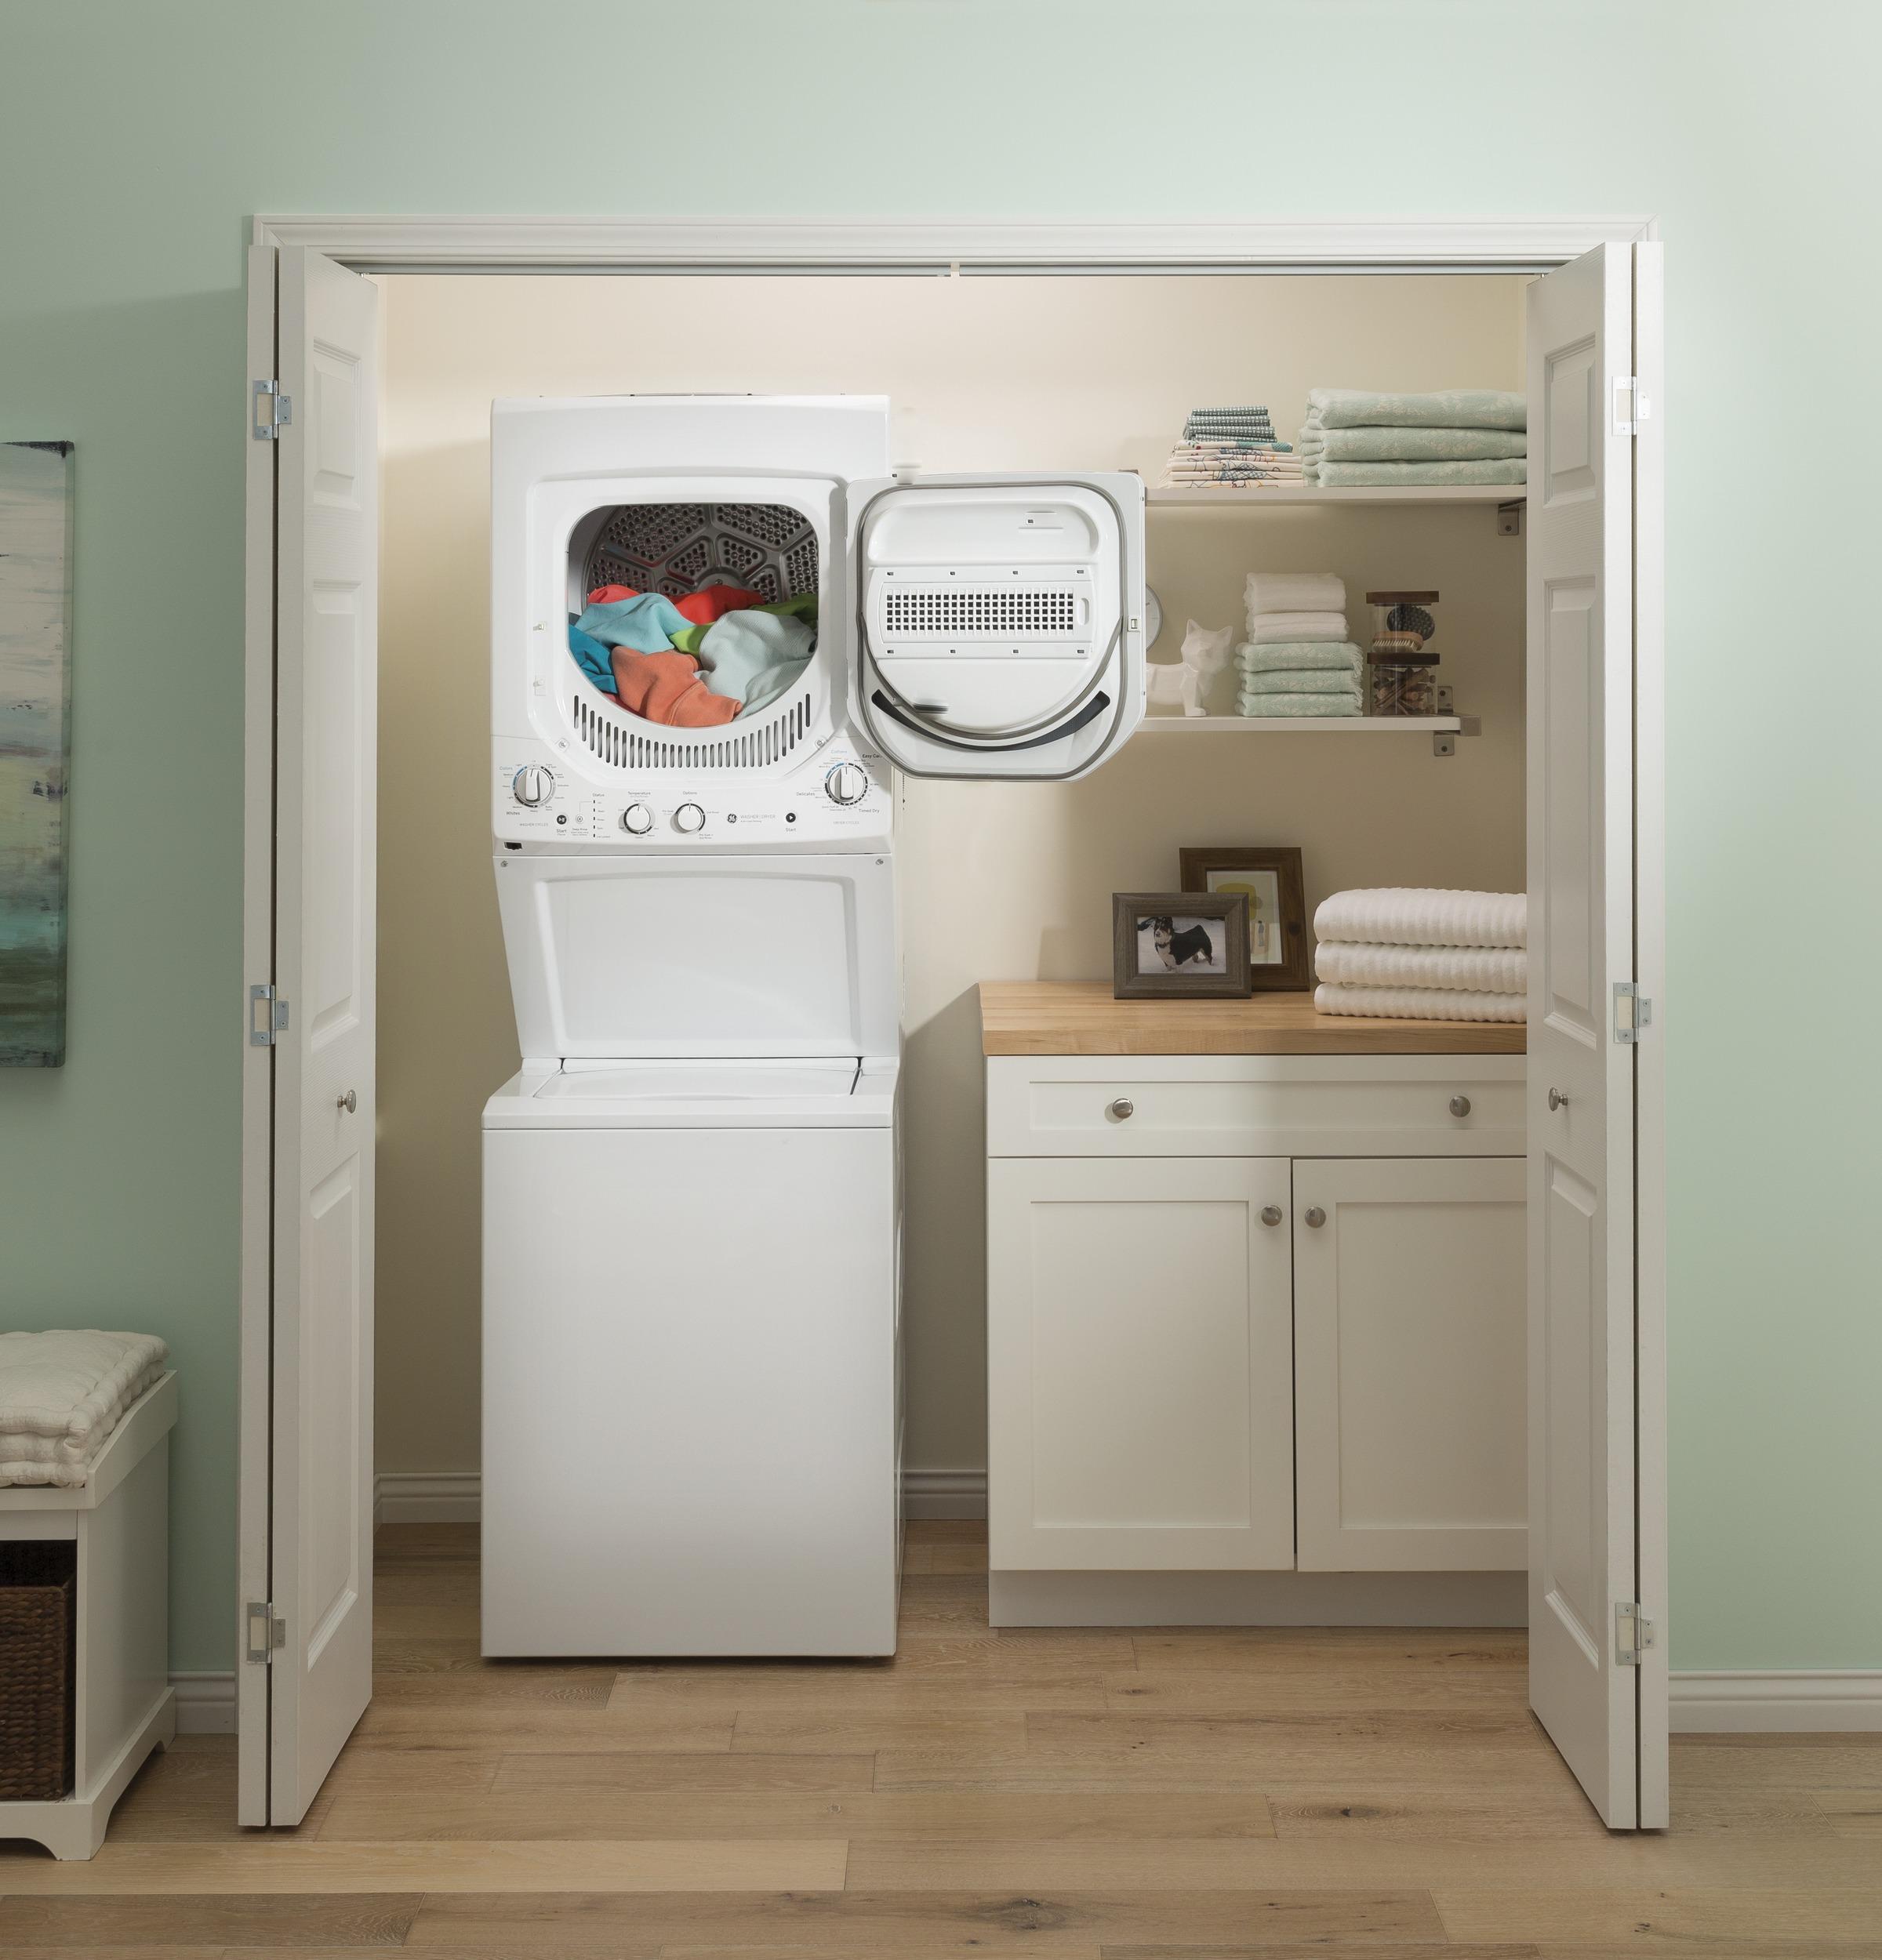 GE Unitized Spacemaker® 2.3 cu. ft. Capacity Washer with Stainless Steel Basket and 4.4 cu. ft. Capacity Electric Dryer